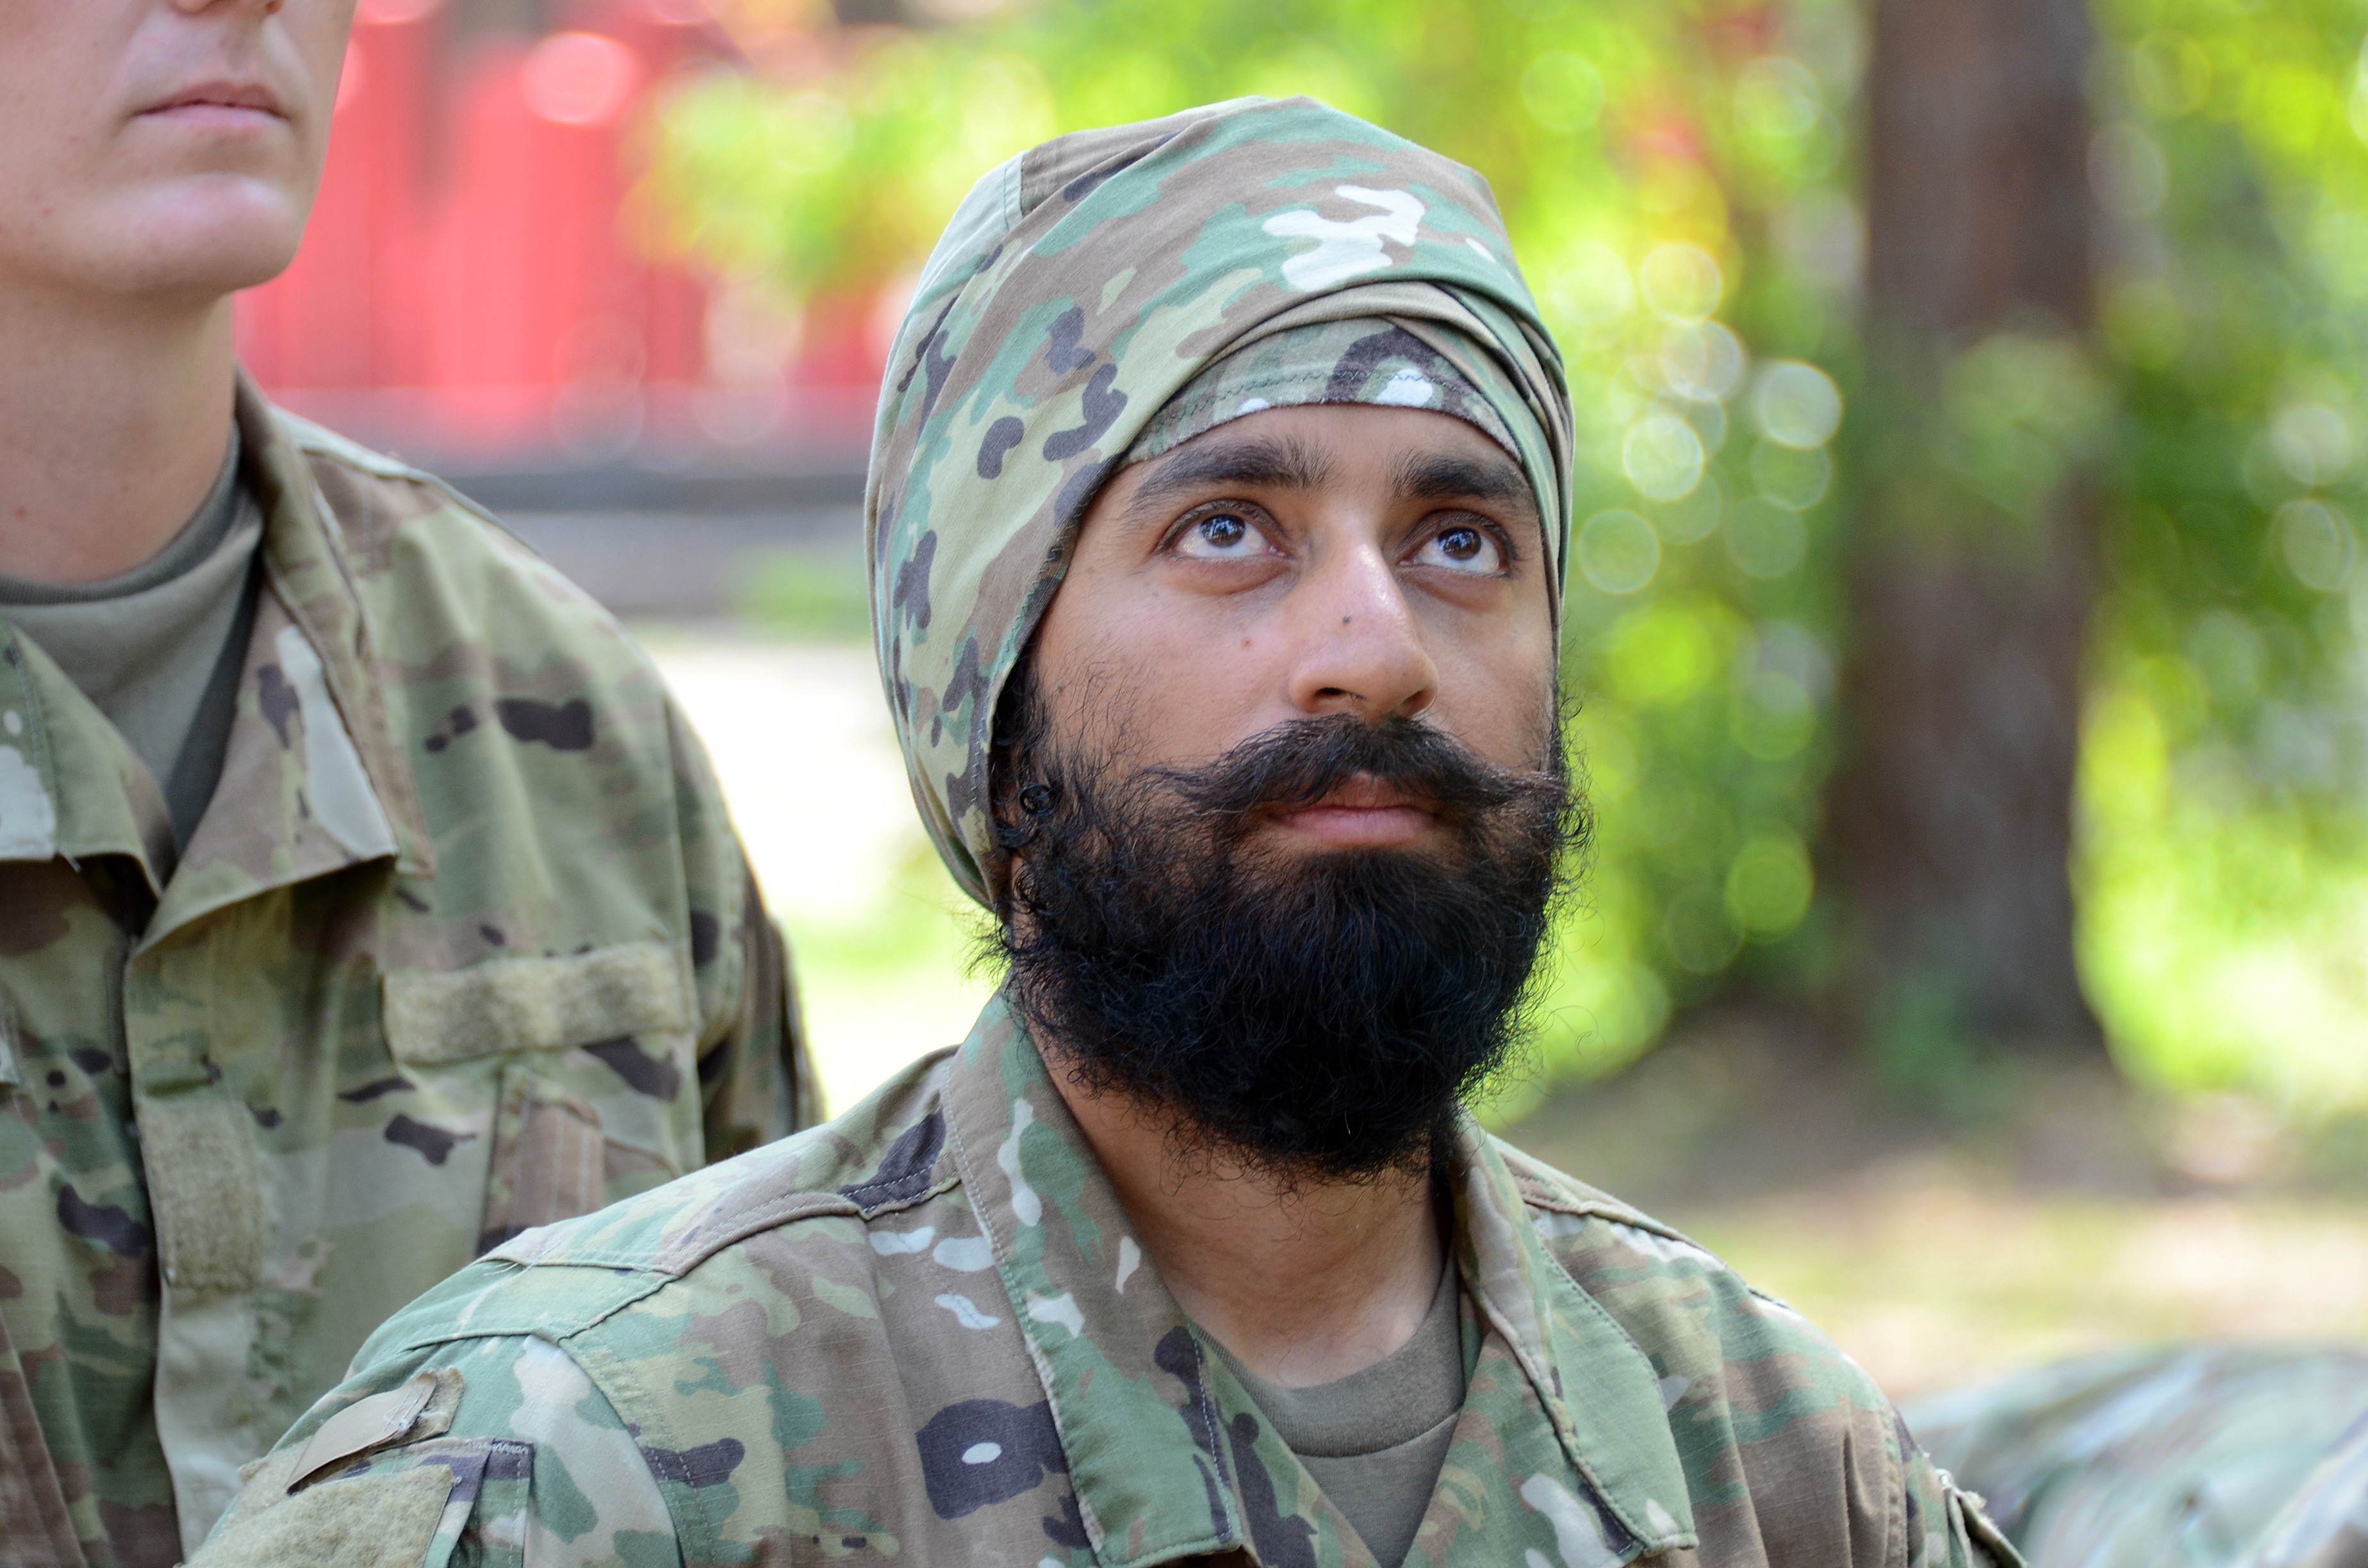 turbans, beards, dreadlocks now permissible for some soldiers